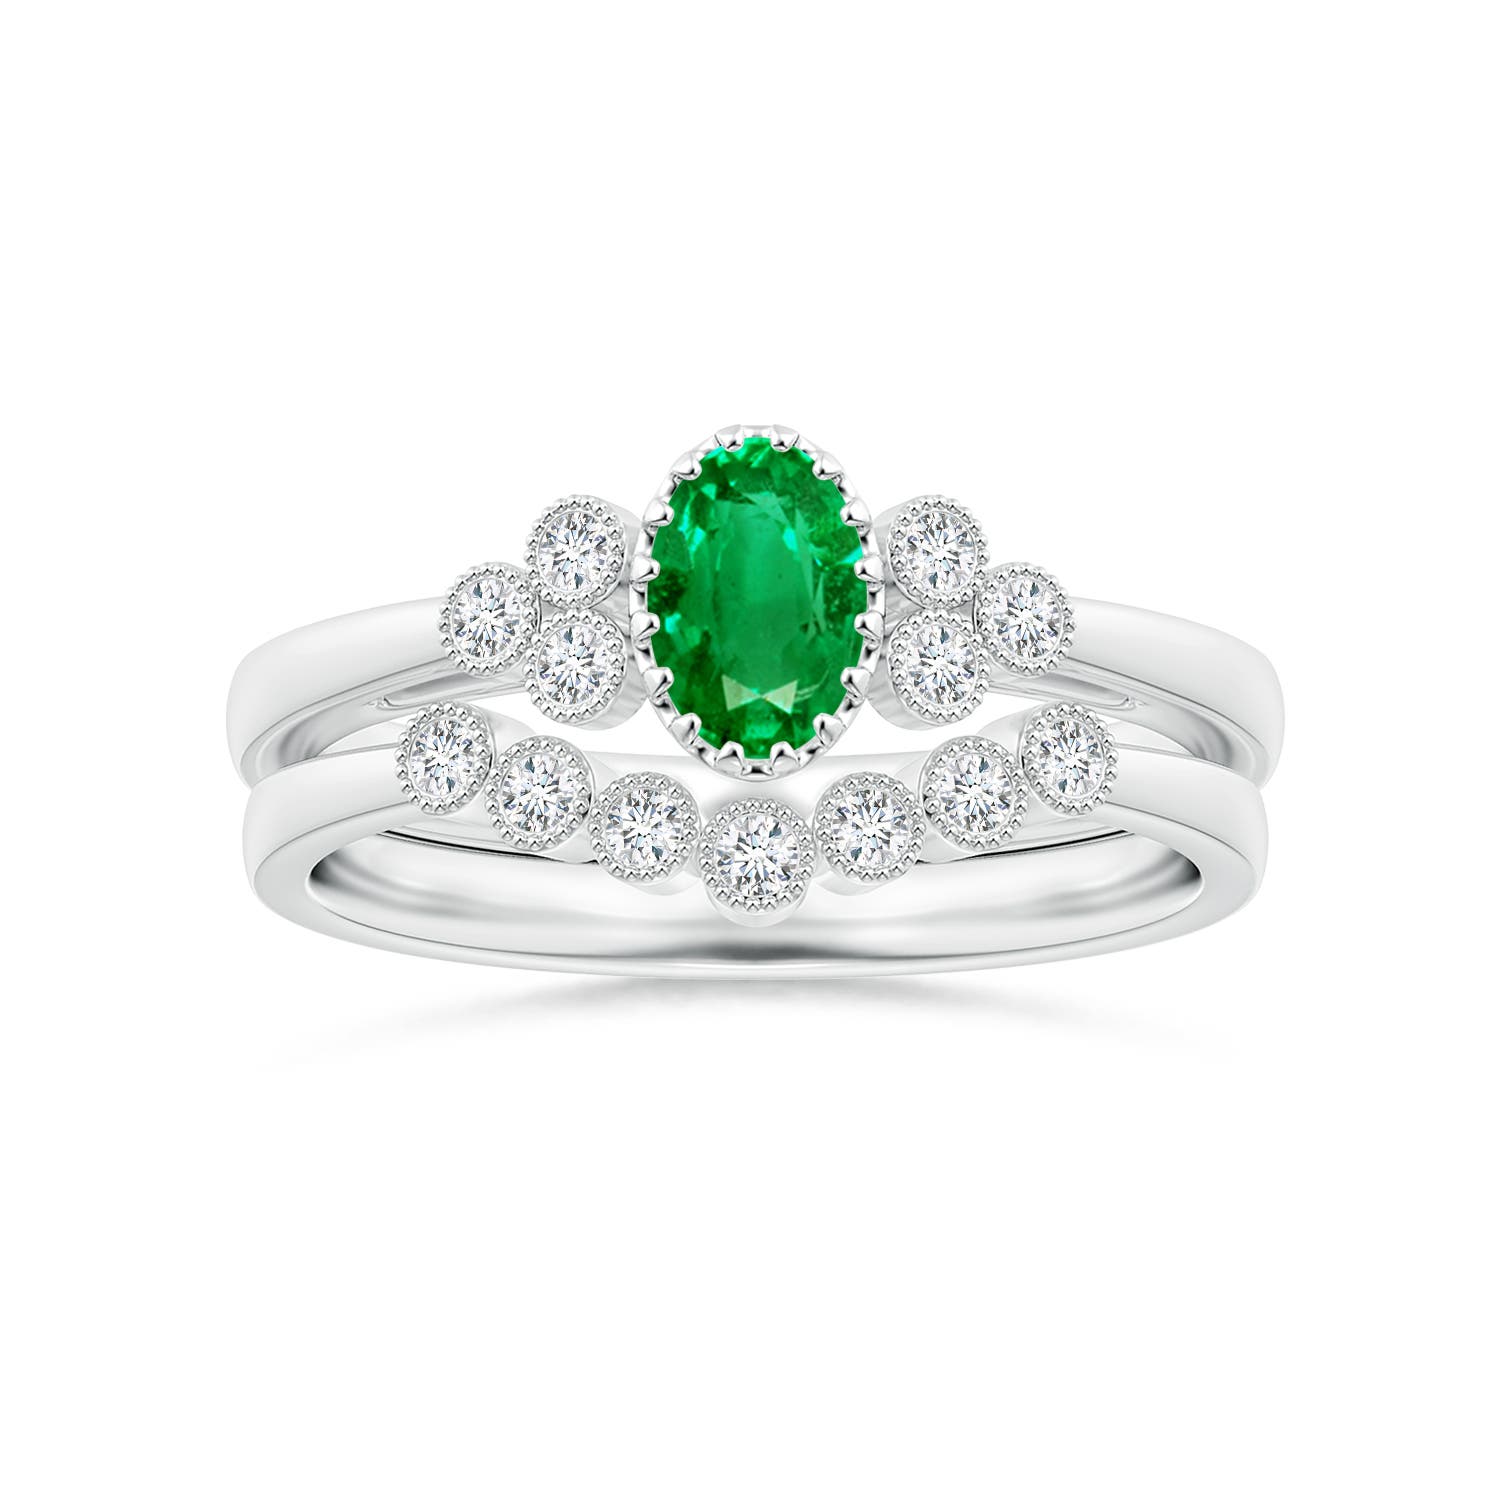 AAA - Emerald / 0.48 CT / 14 KT White Gold